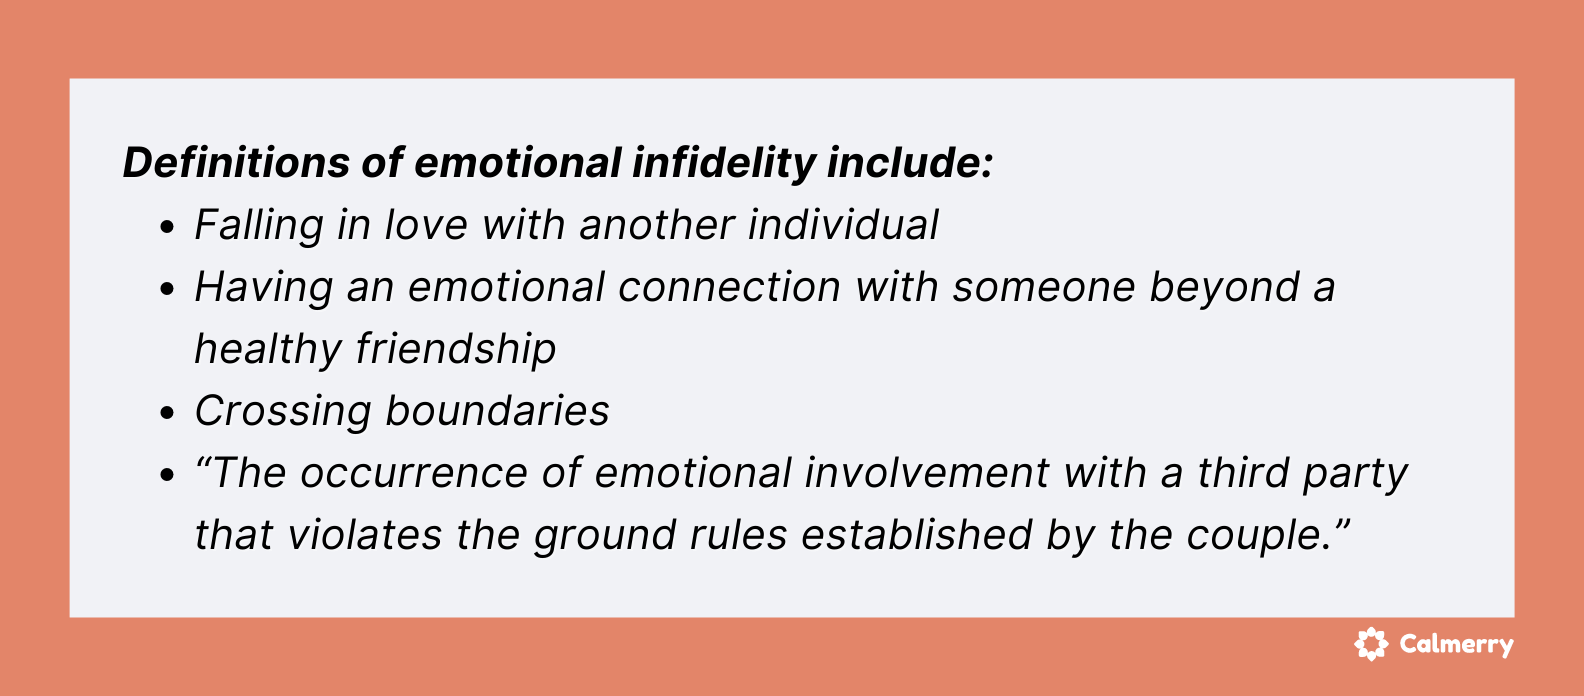 Definitions of emotional infidelity include